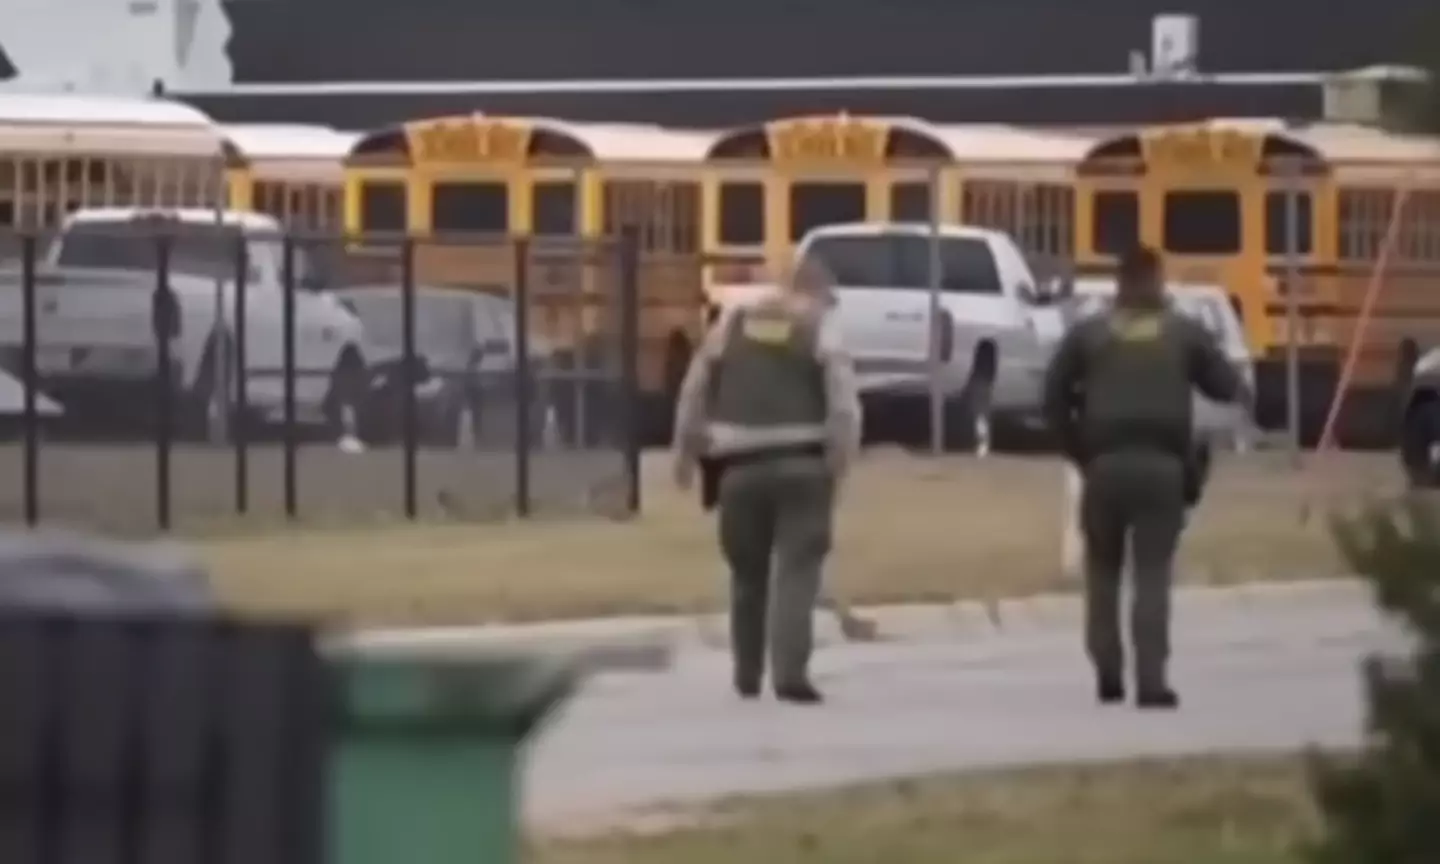 The shooting took place at Perry High School in Iowa.